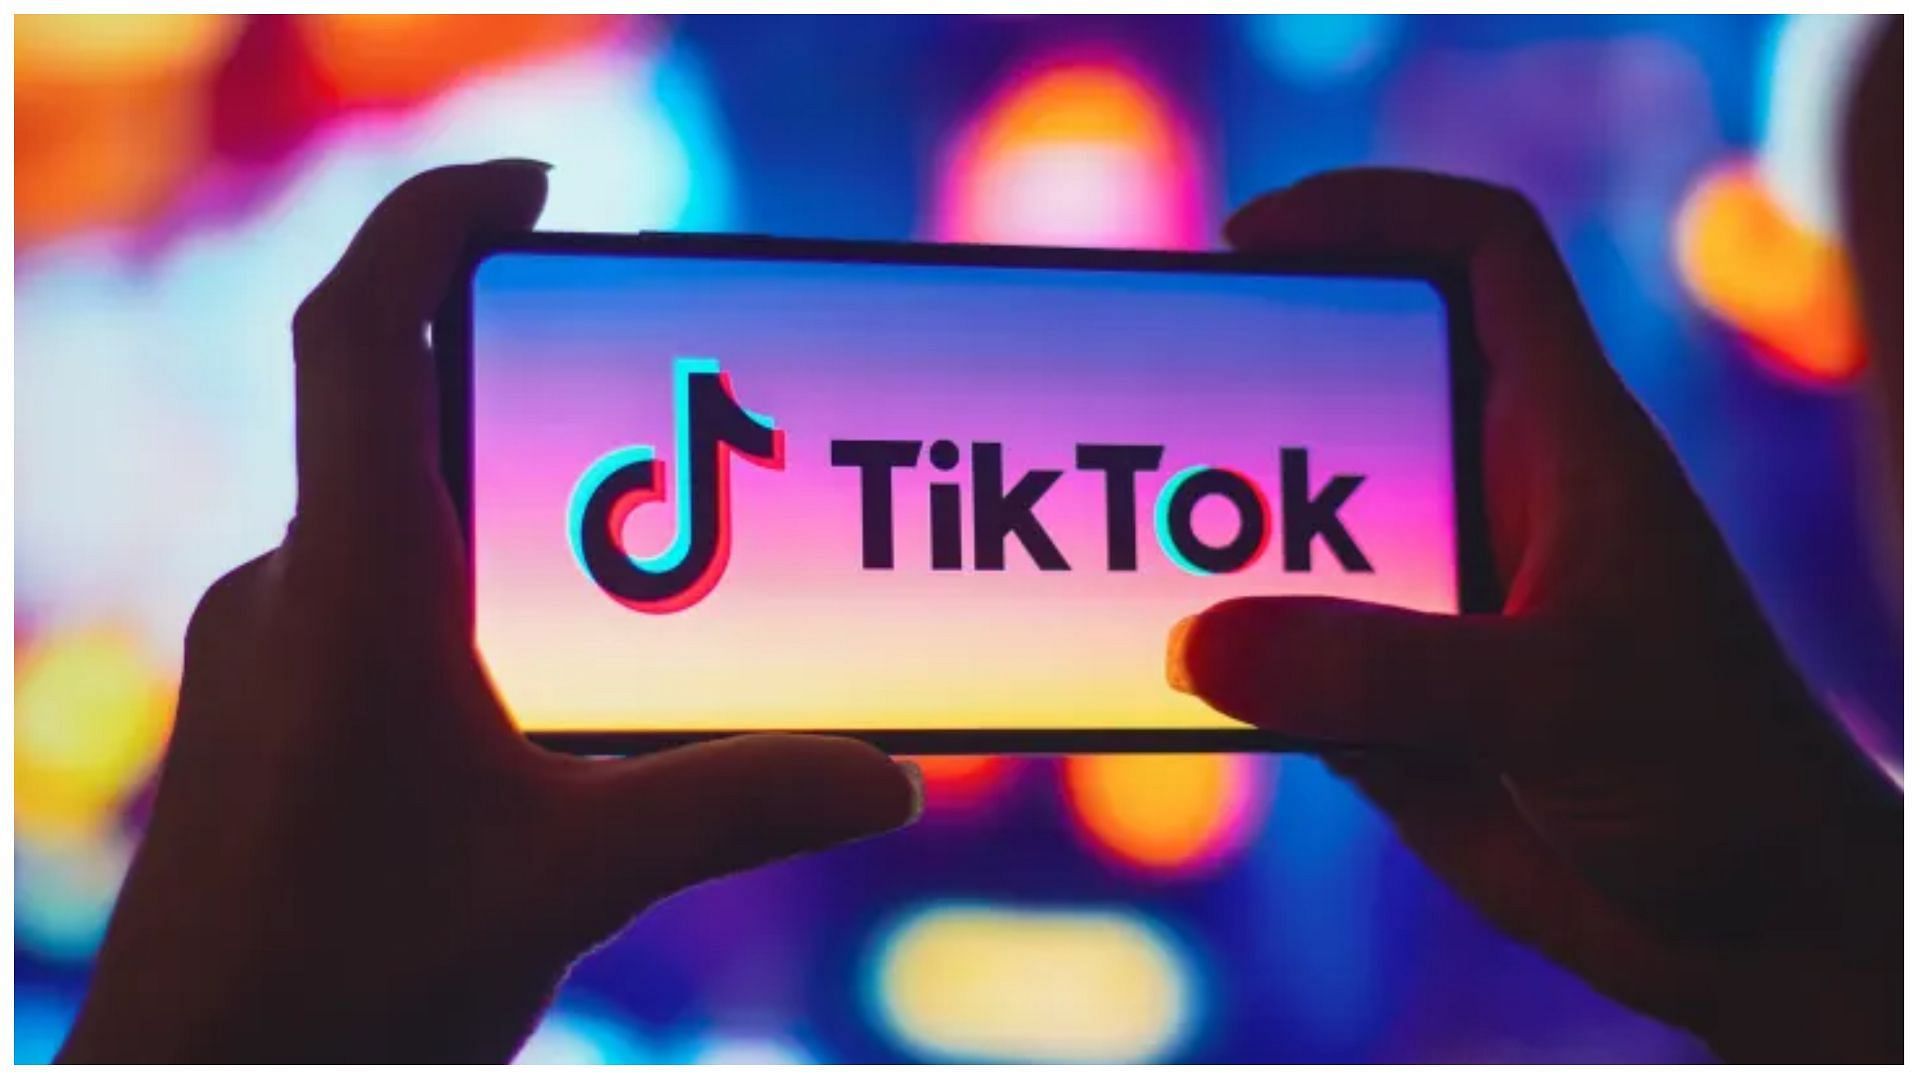 ASL is the latest term gaining popularity on TikTok (image via Getty Images/Rafael Henrique))